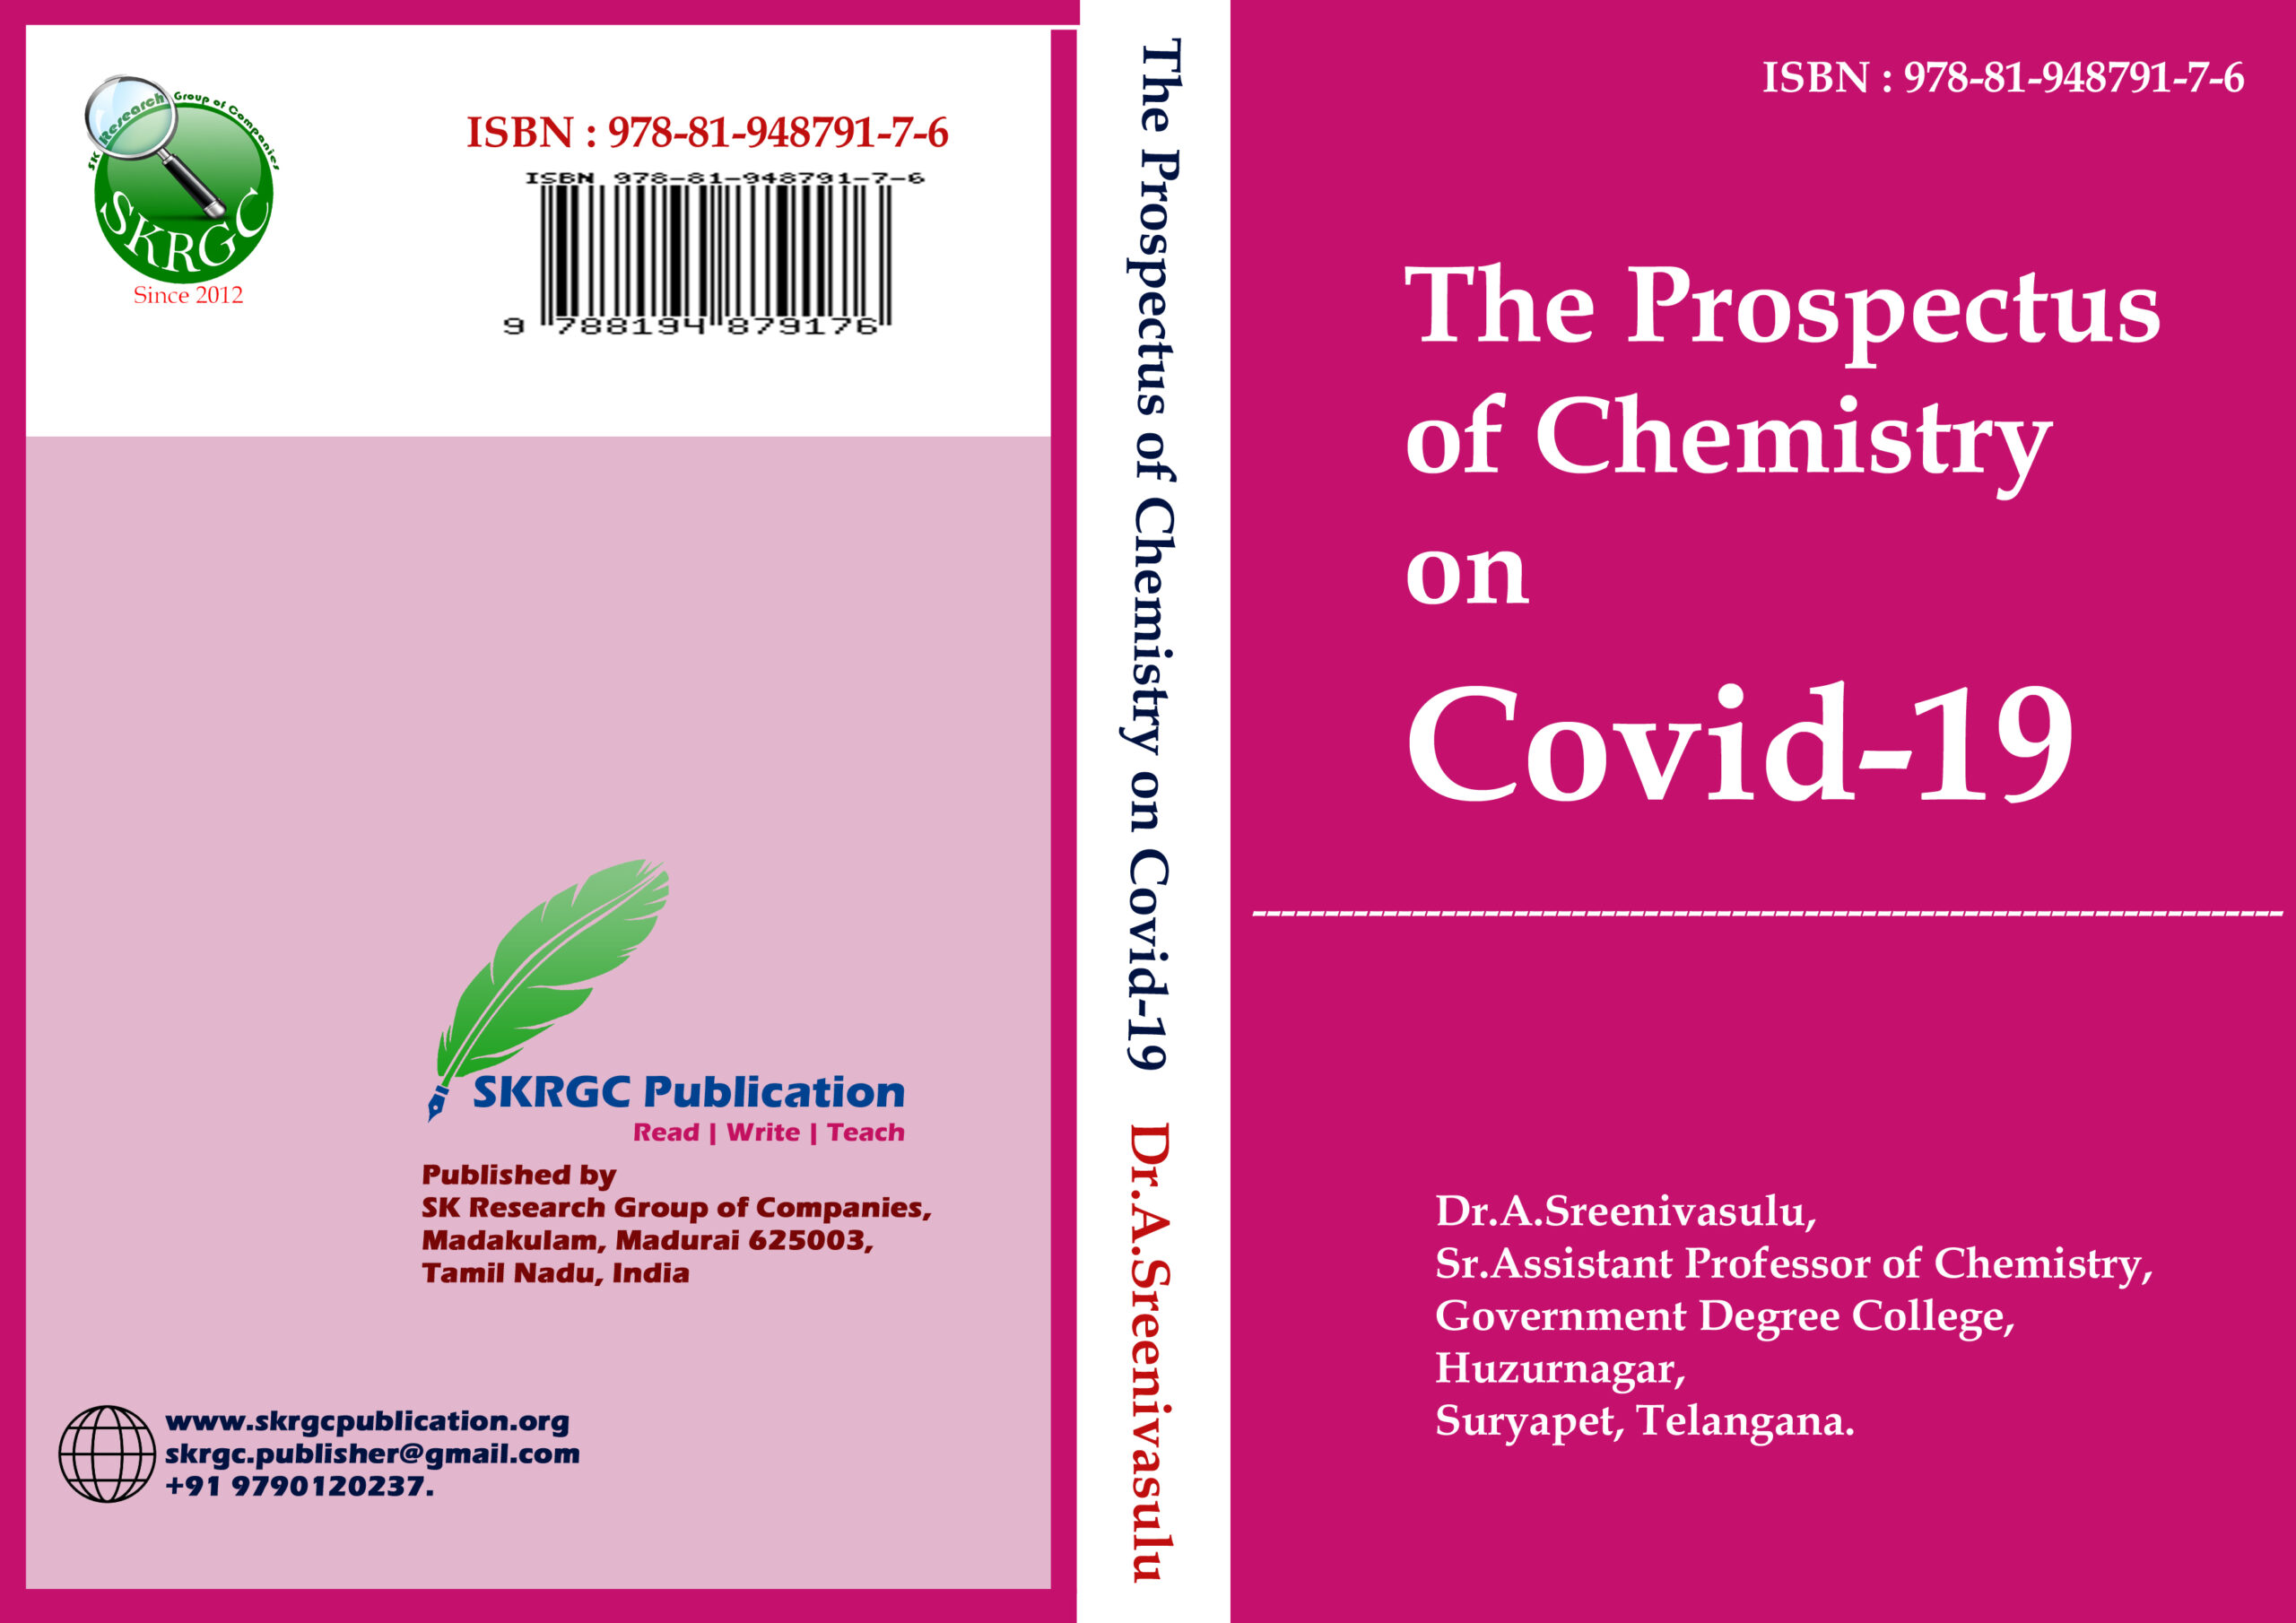 The Prospectus of Chemistry on Covid-19